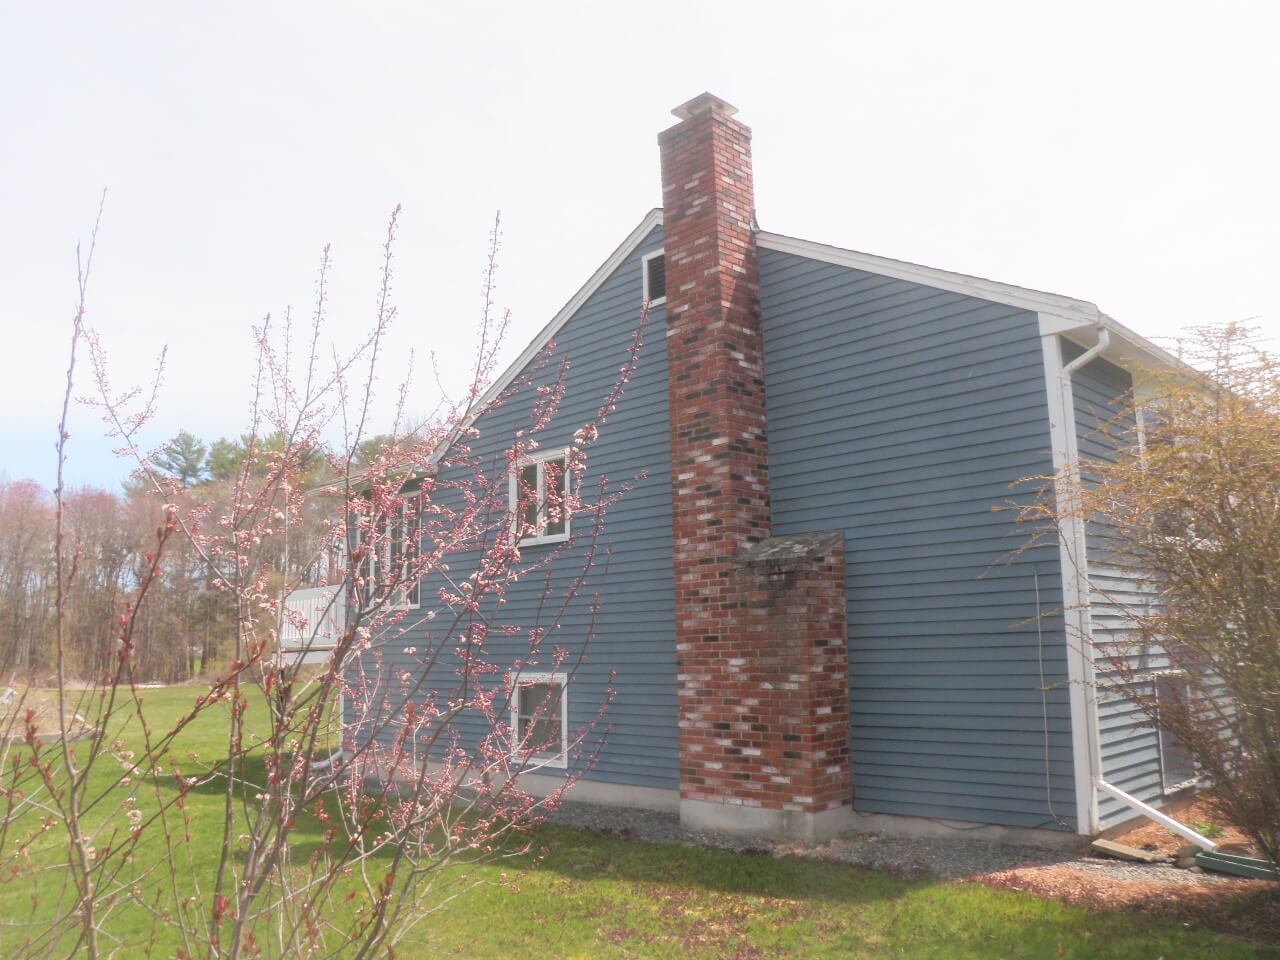 Exterior Chimney Image Example two story house